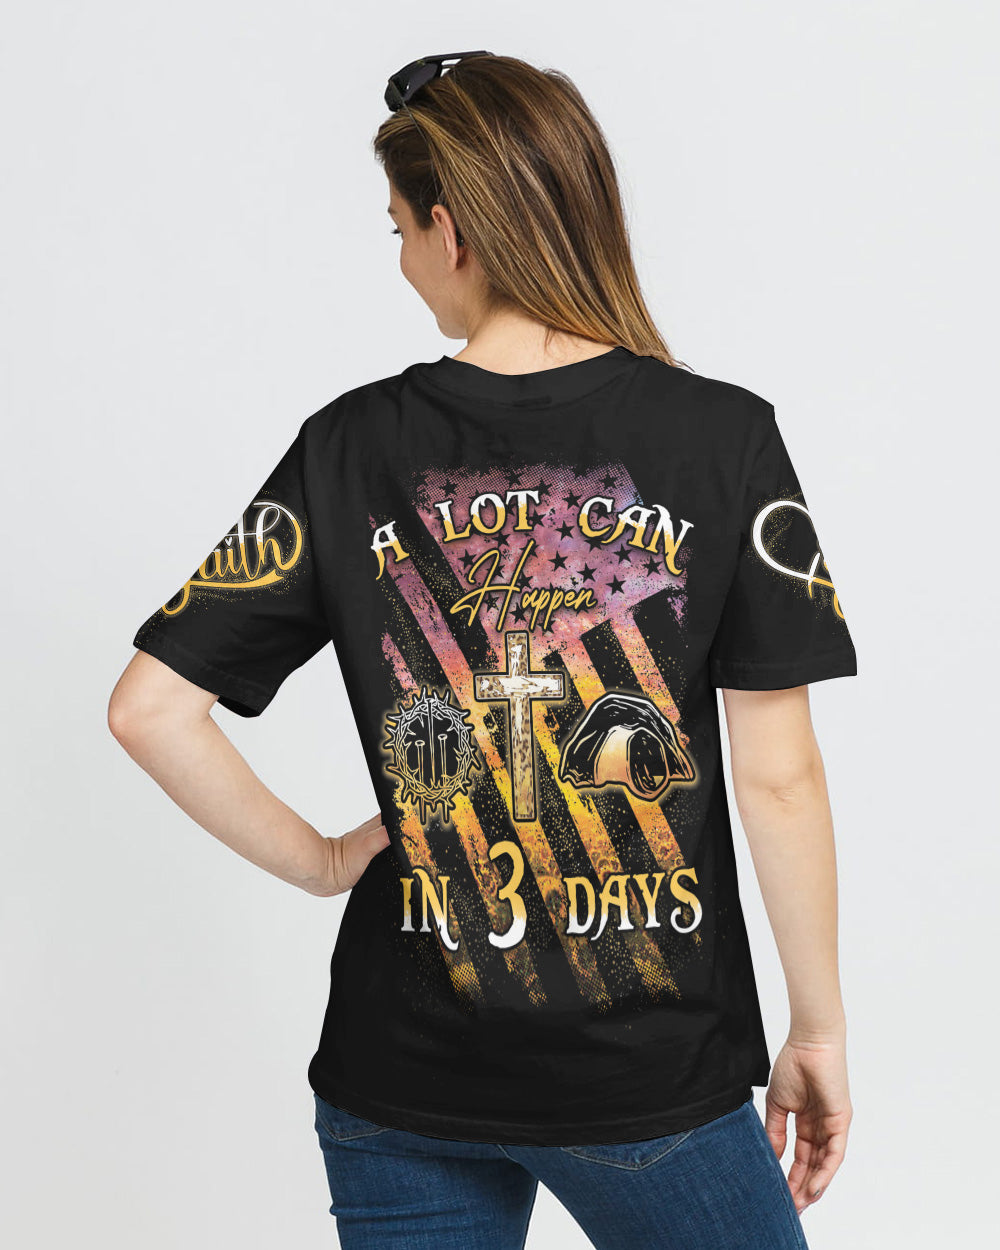 A Lot Can Happen In 3 Days Women's Christian Tshirt